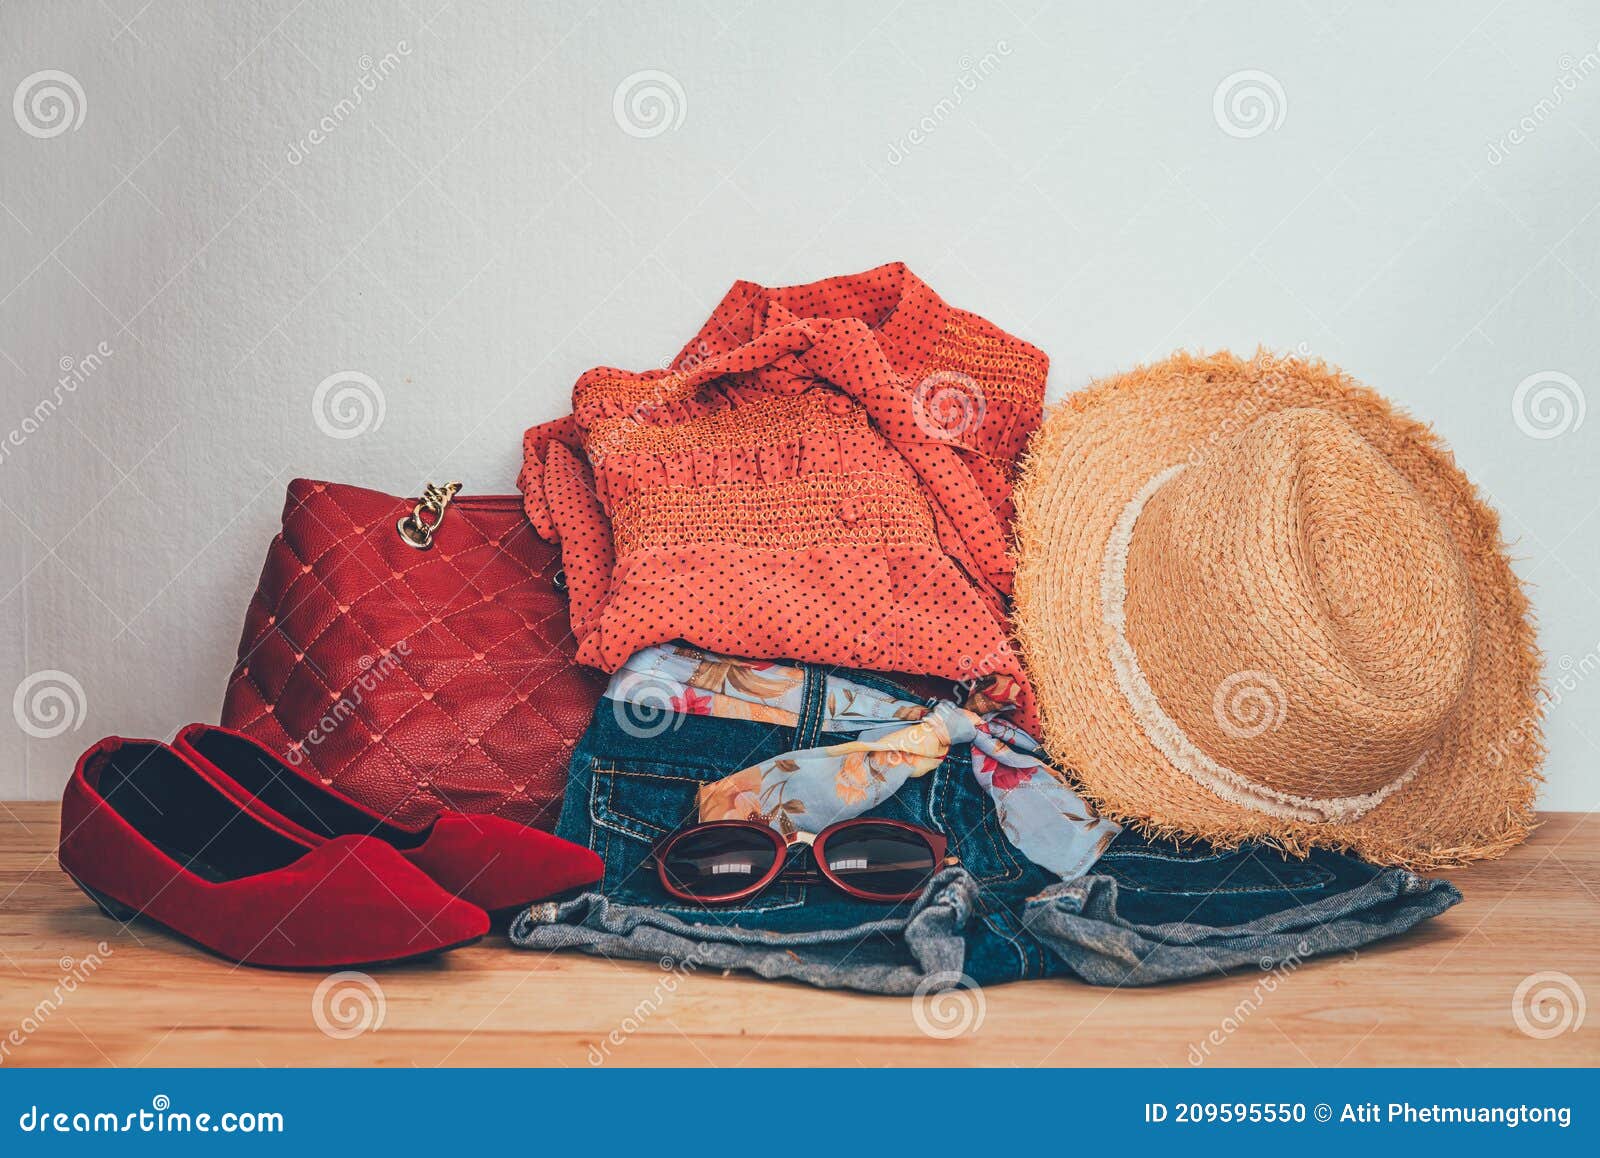 Clothing for Women, Placed on a Wooden Floor Stock Photo - Image of ...